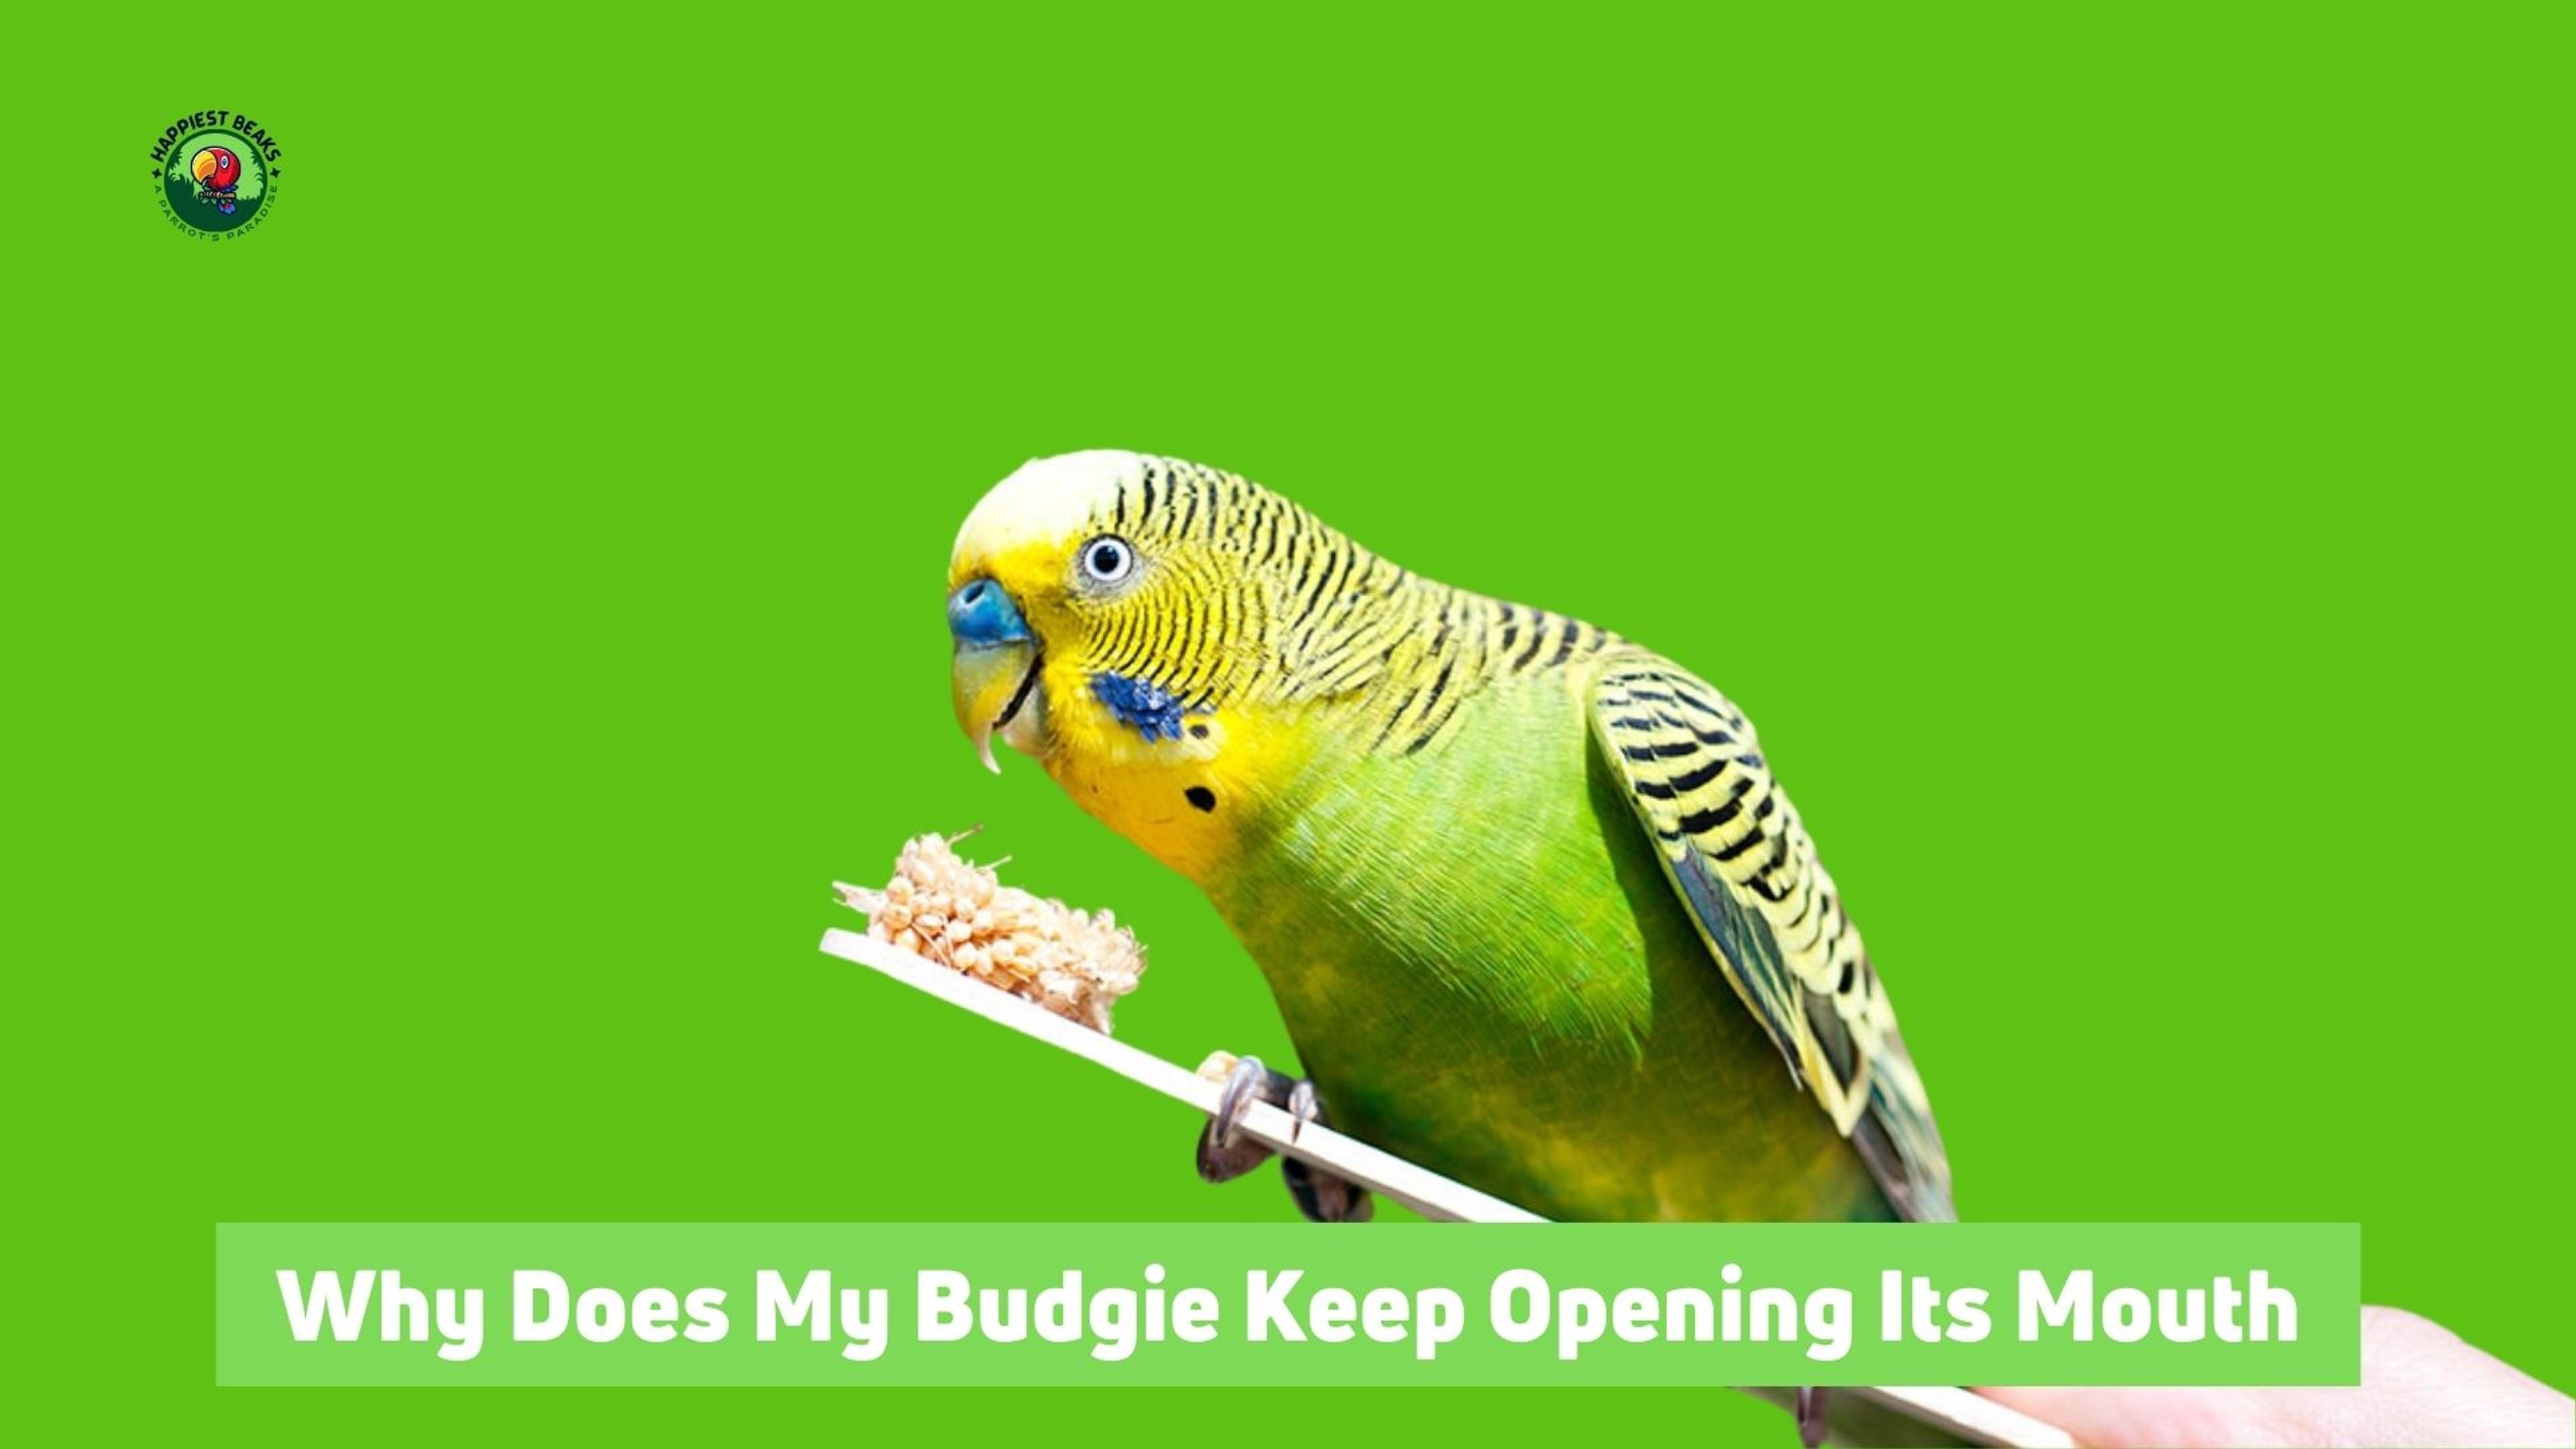 Why Does My Budgie Keep Opening Its Mouth?